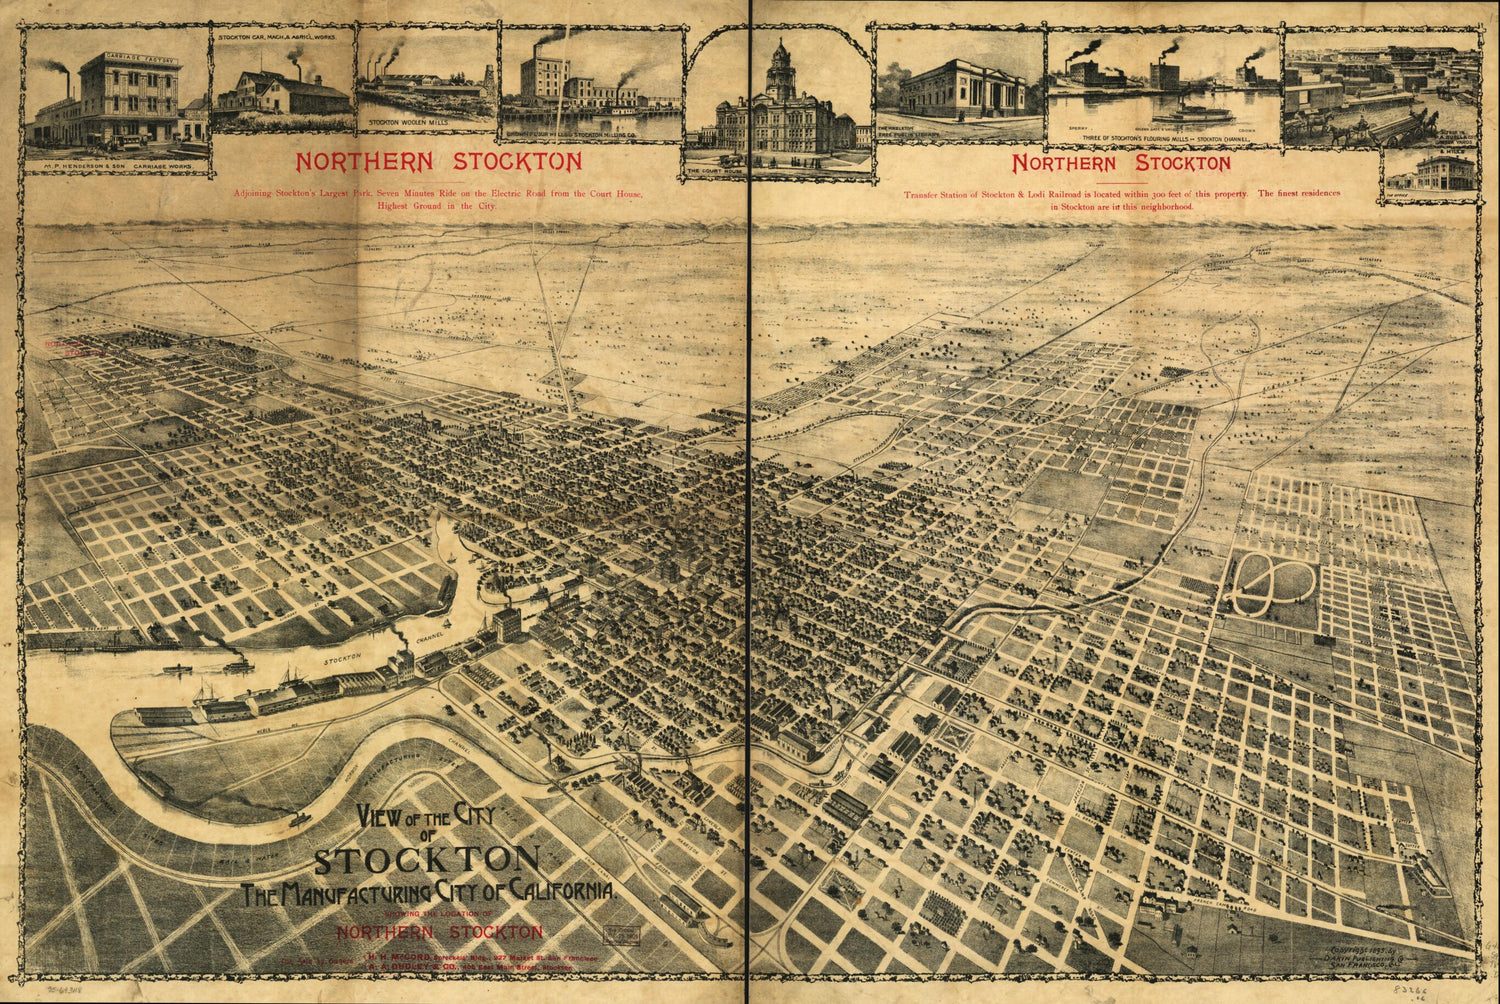 This old map of View of the City of Stockton, the Manufacturing City of California Showing the Location of Northern Stockton from 1895 was created by  Dakin Publishing Co in 1895